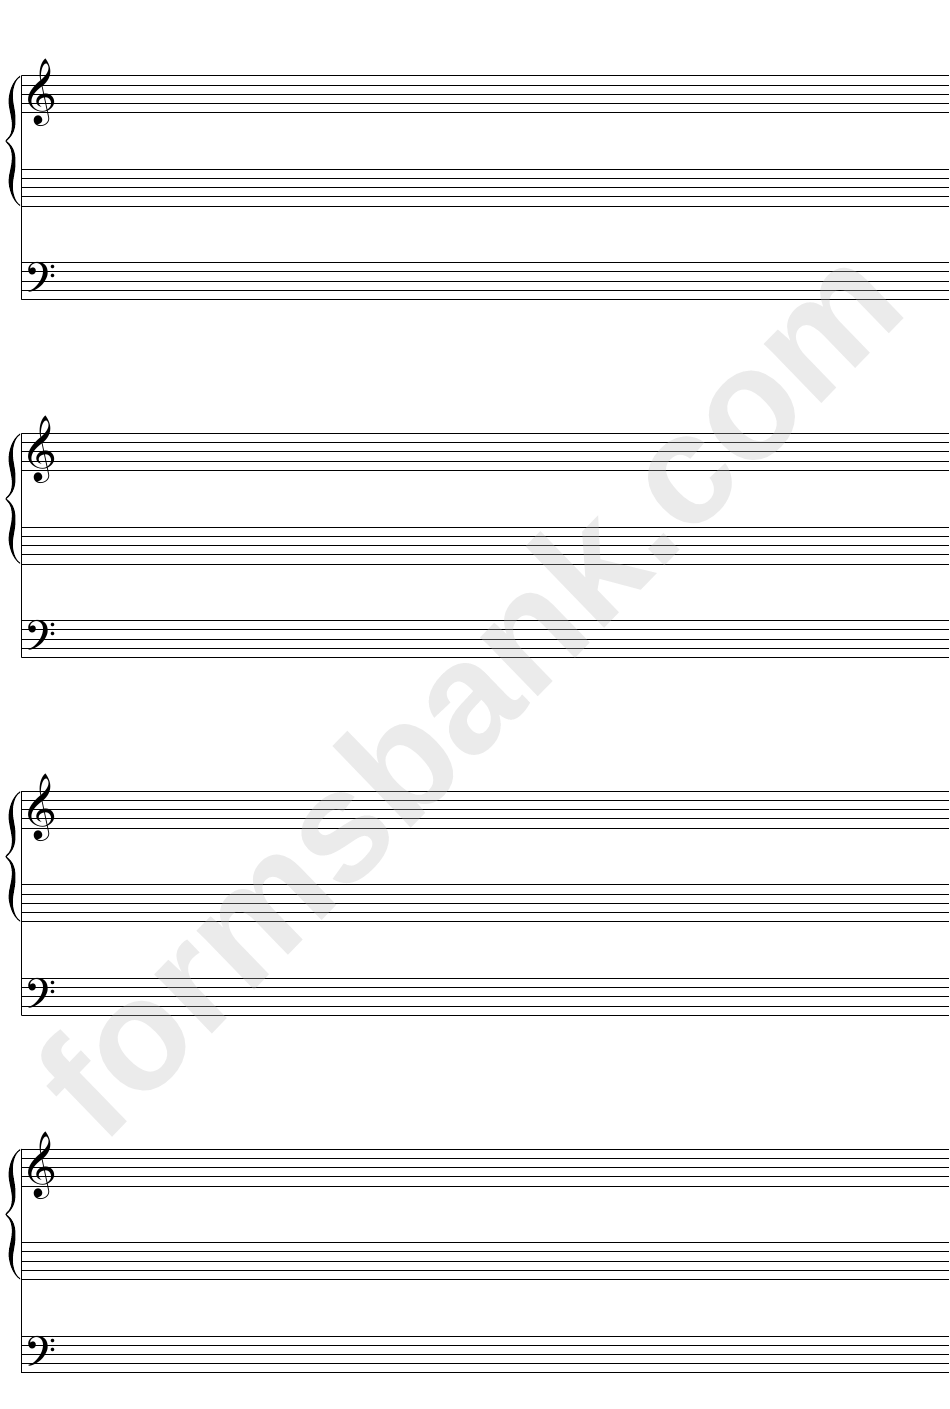 4-Stave Organ With Pedal, Treble Clef, Blank Clef, Bass Clef (A4 Portrait) Blank Sheet Music